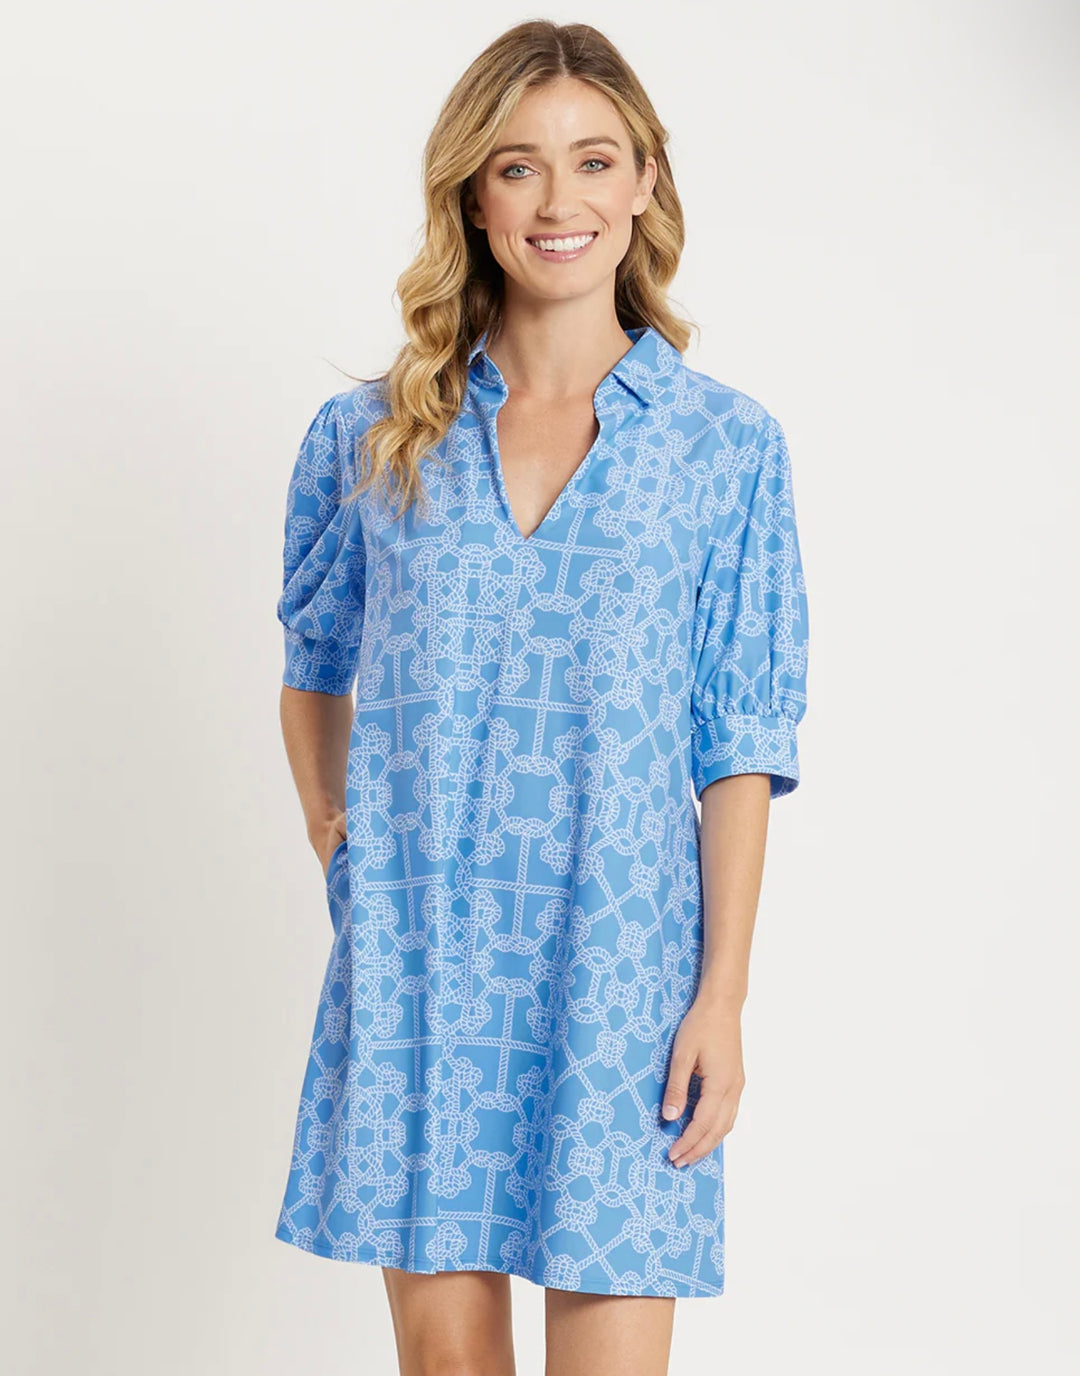 Emerson dress in blue rope by Jude Connolly